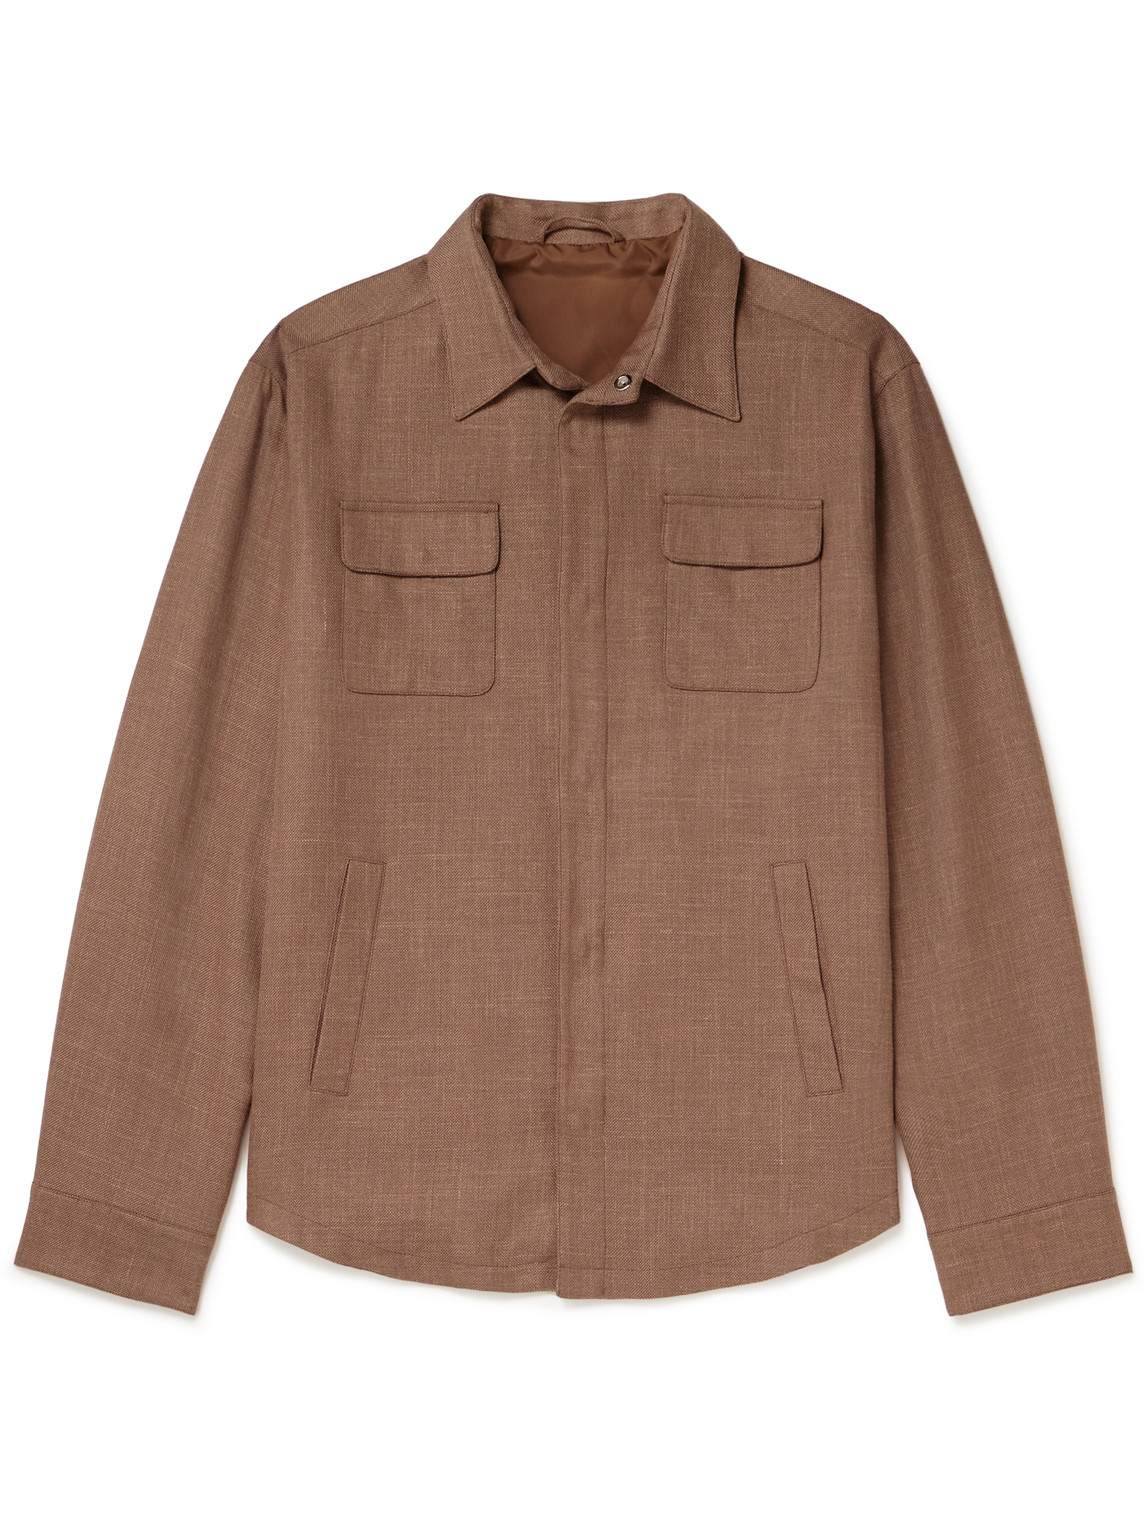 THOM SWEENEY LINEN, WOOL AND SILK-BLEND JACKET